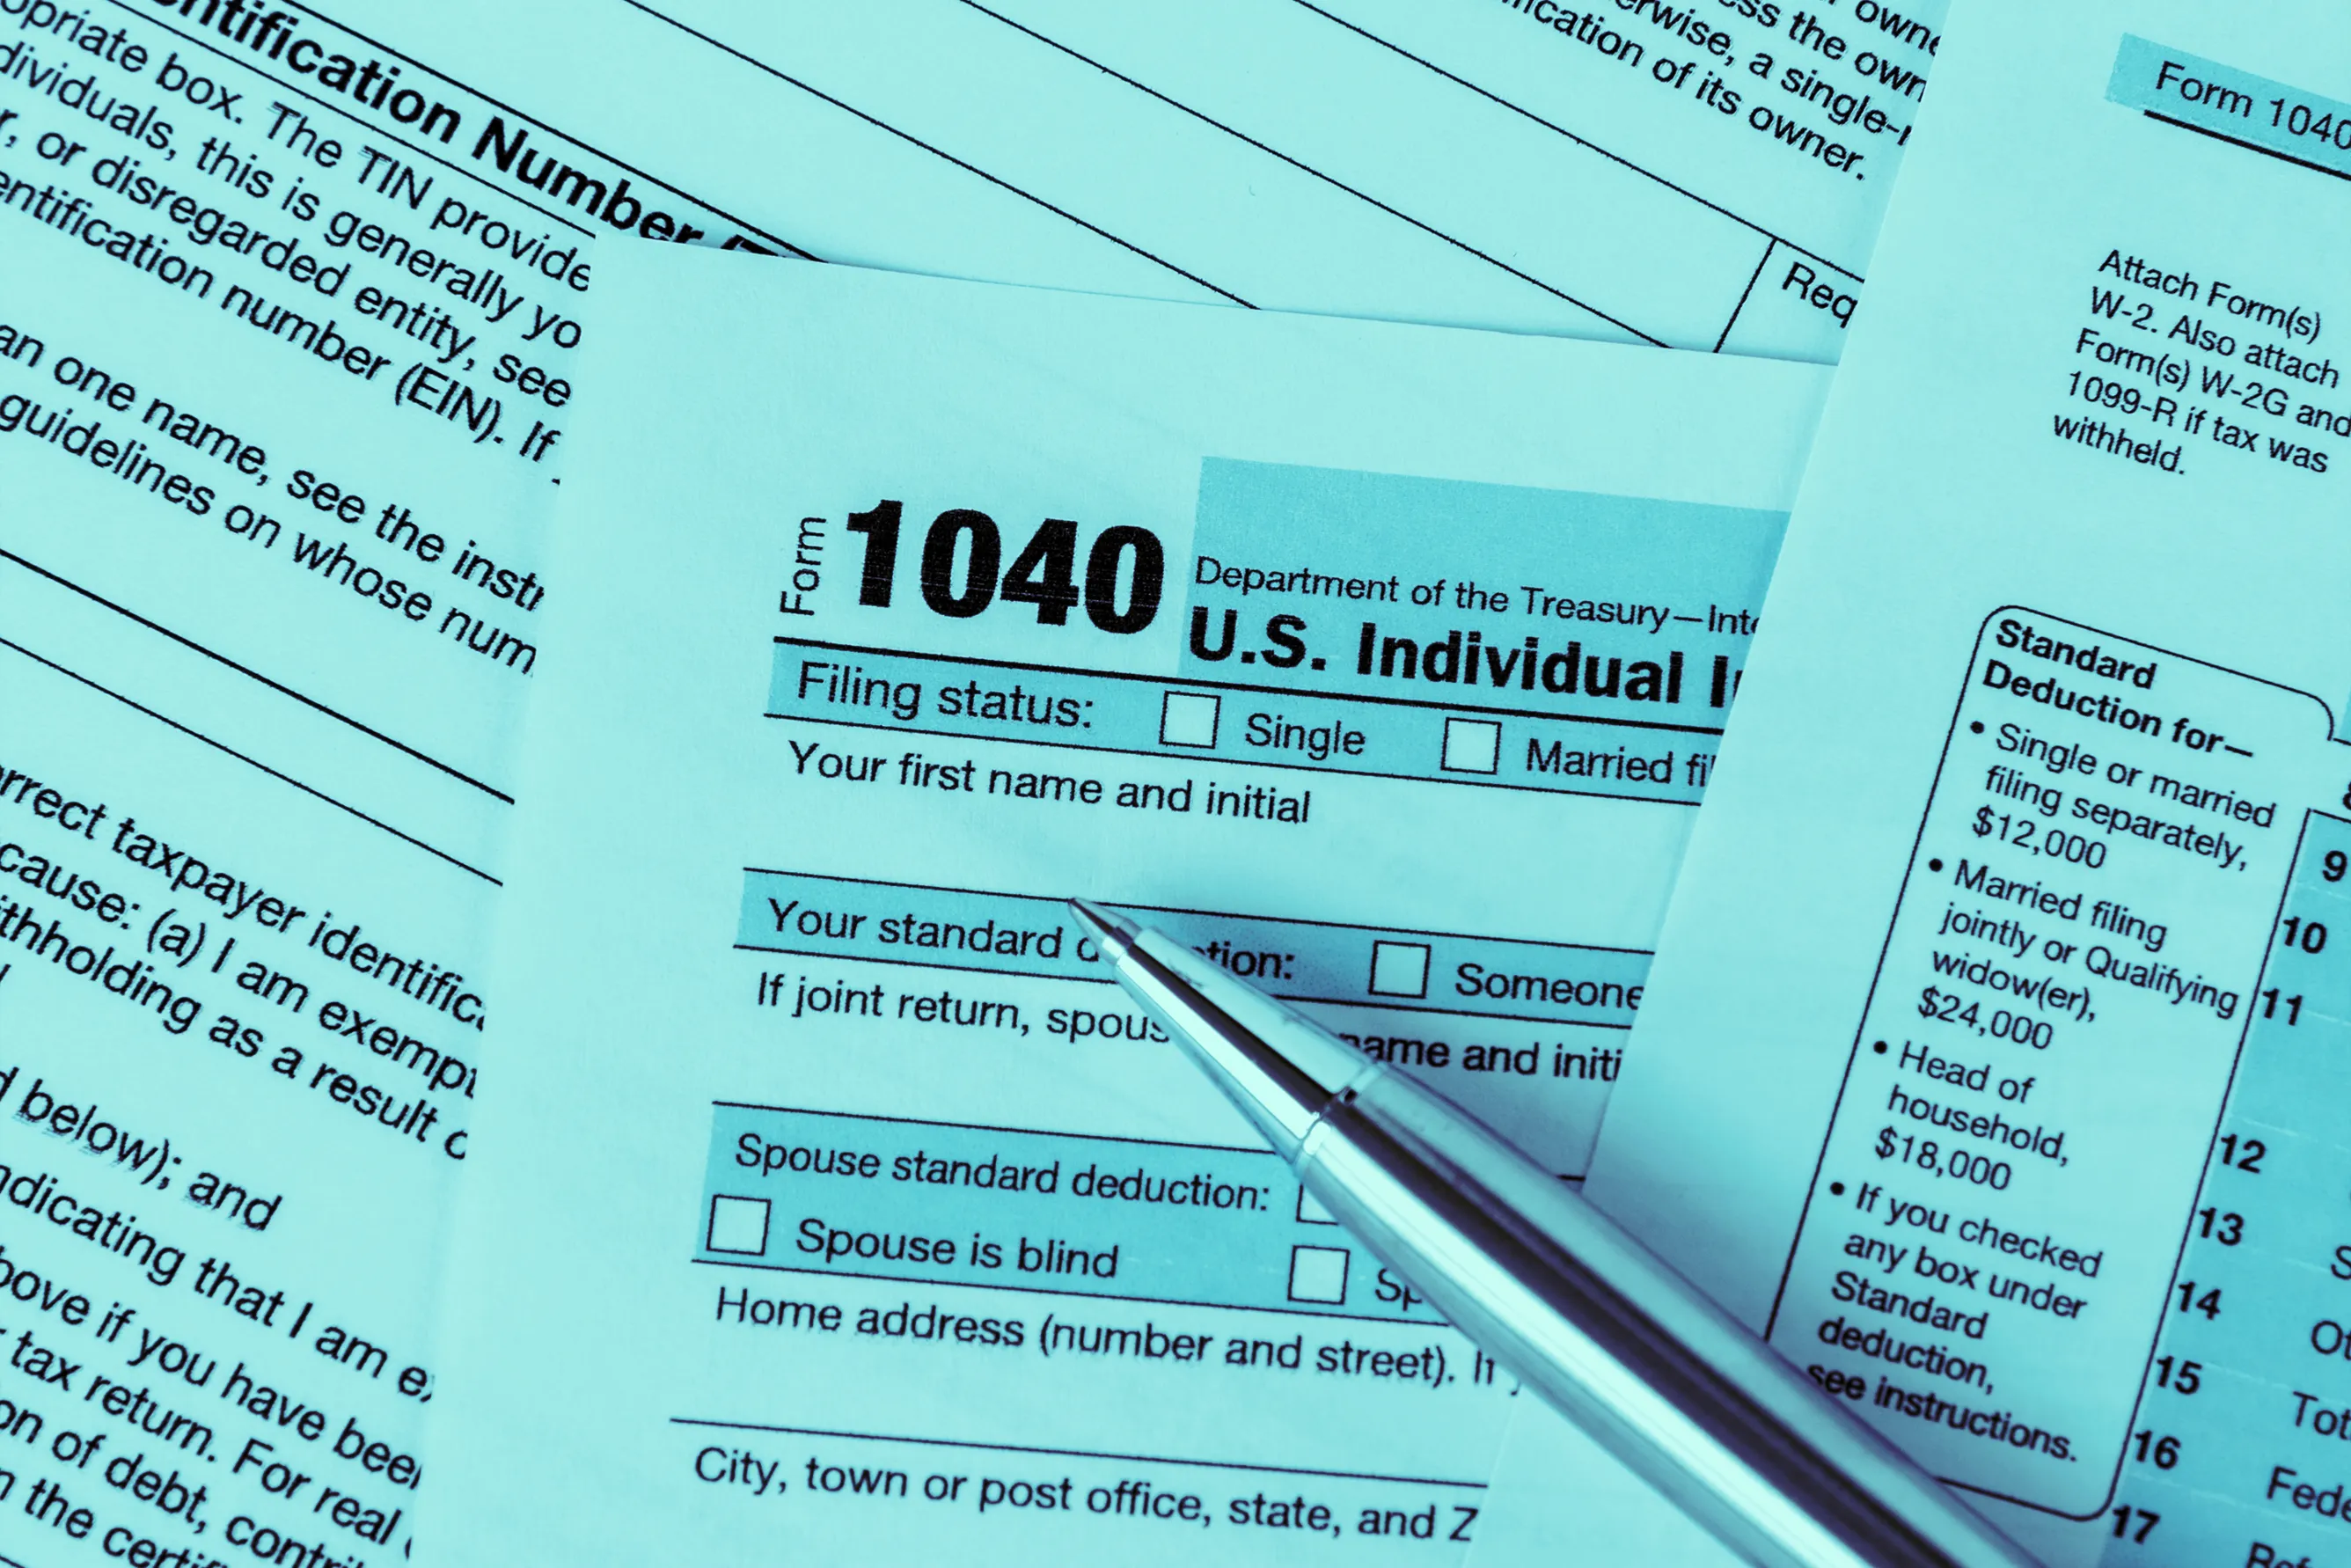 IRS Tax Deadline What's the Last Day to File Taxes in 2020? Money